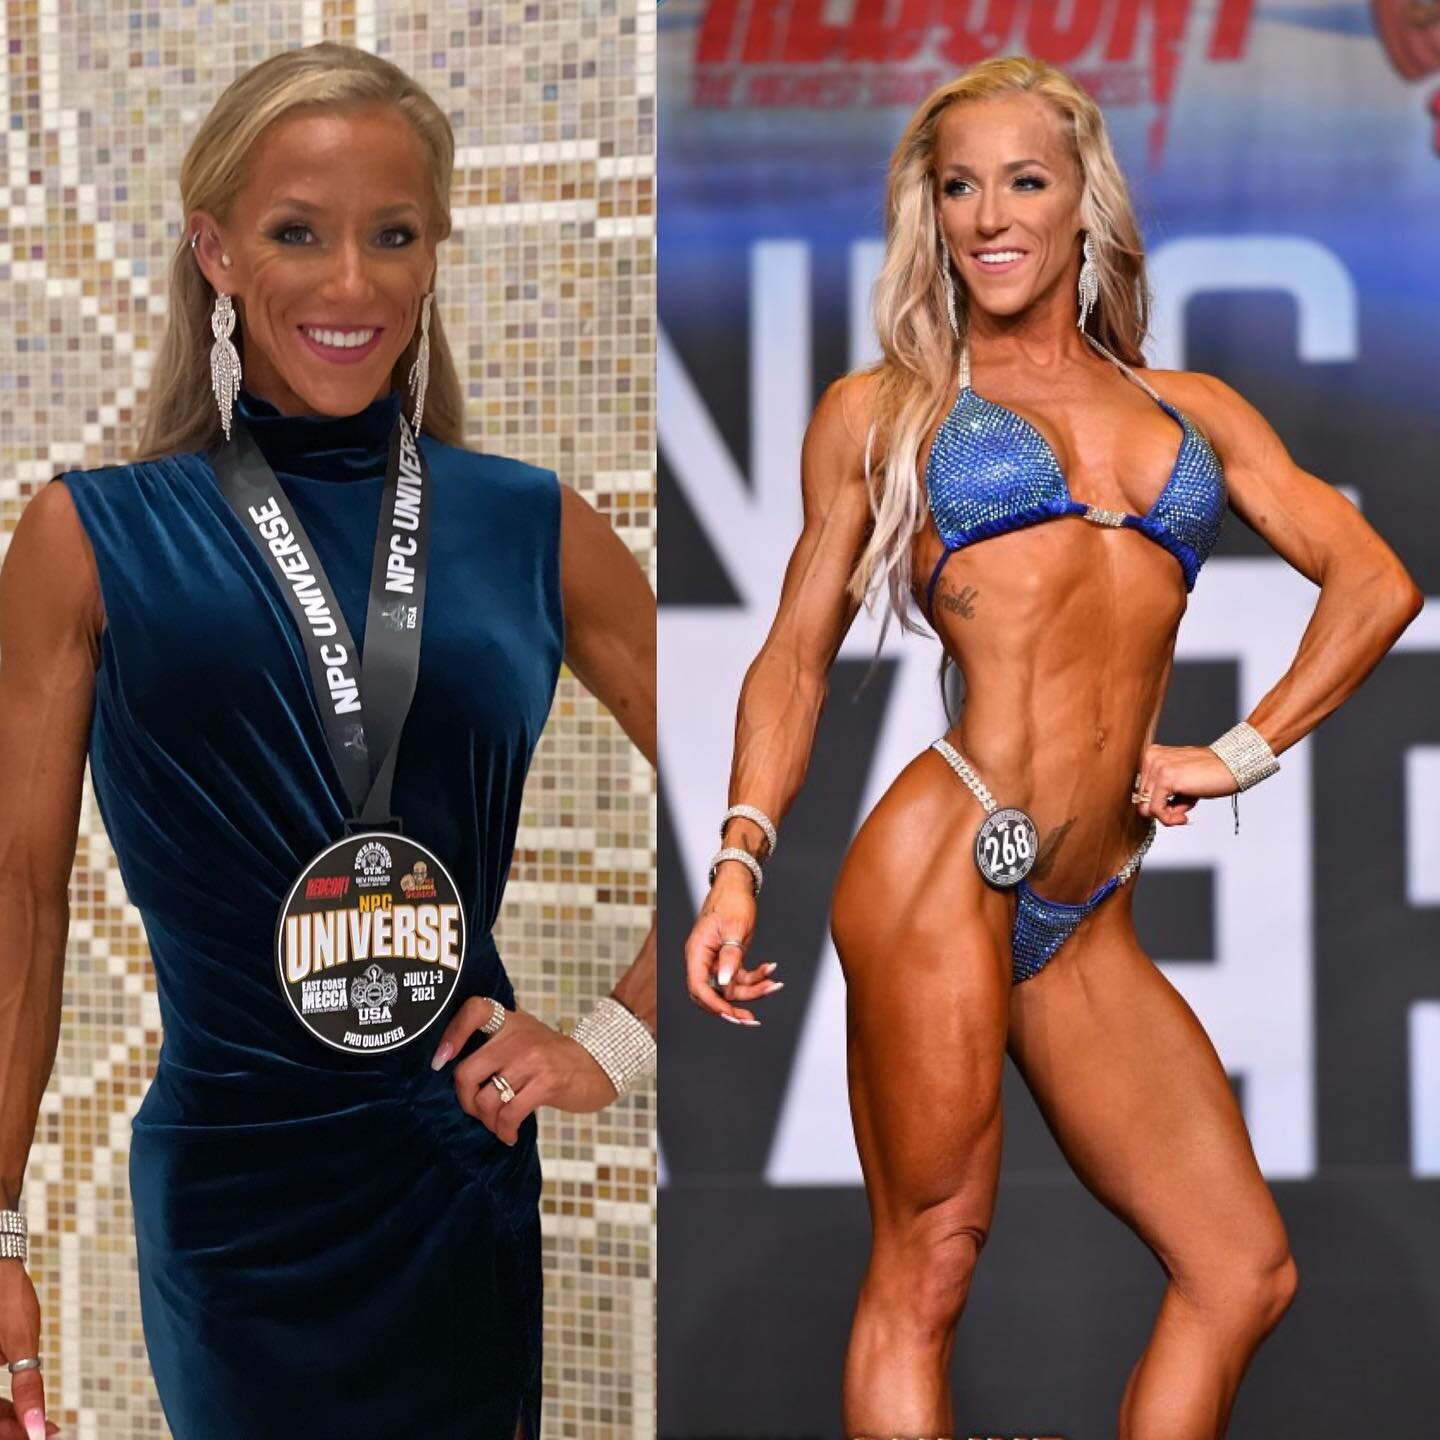 Sending a huge congratulations to our flawless queen, @fearlessly_fit_fallon, who took home 3rd place at NPC Universe! 👏🏼🤩 Fallon has made INSANE improvements from her first season competing (which was last year) and she is only getting better. We